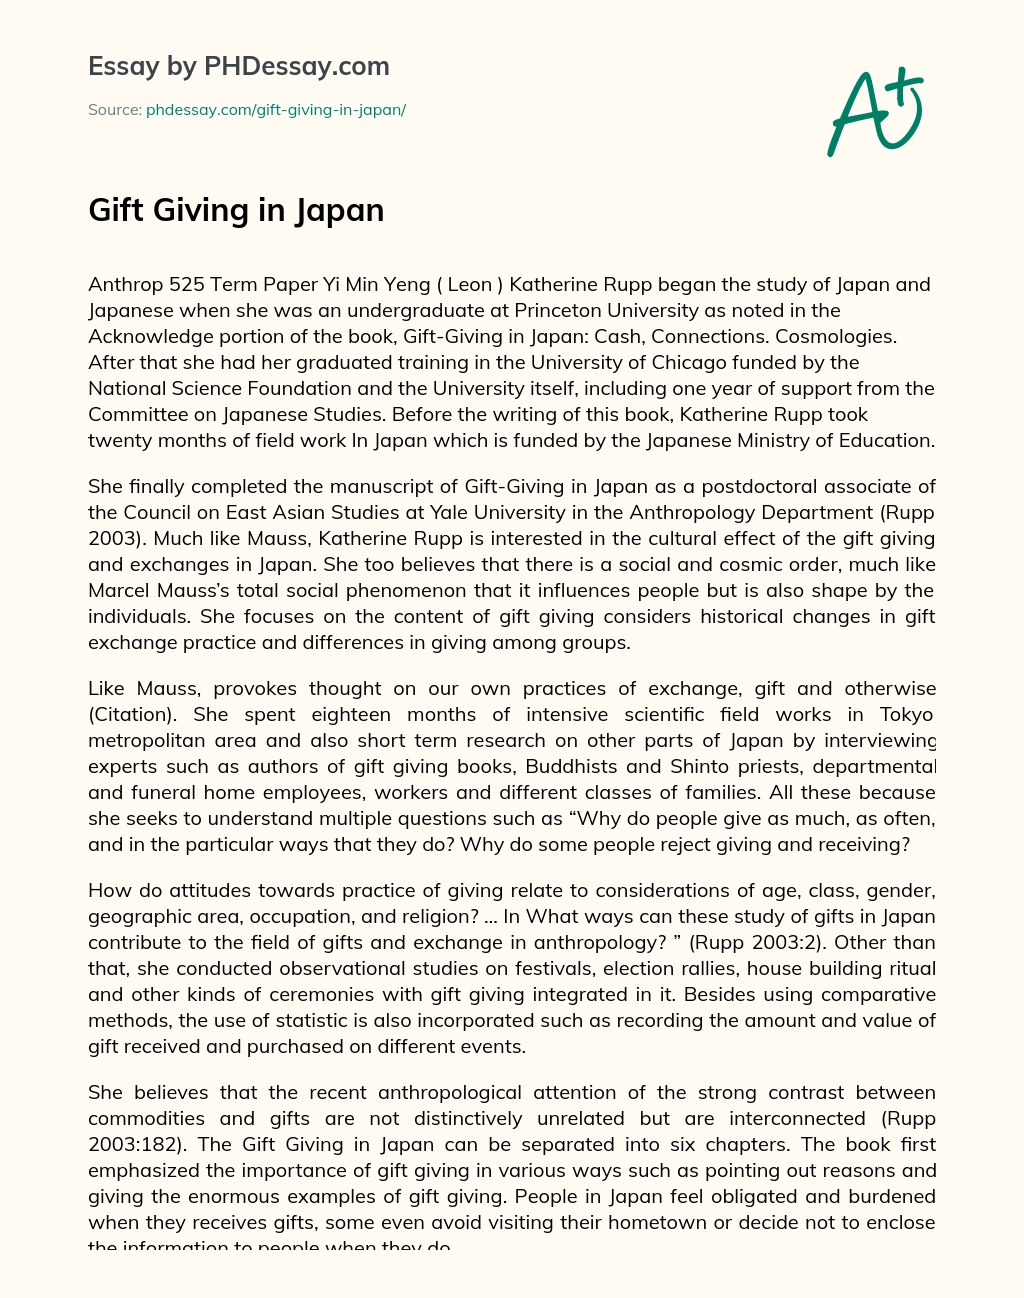 Gift Giving in Japan essay